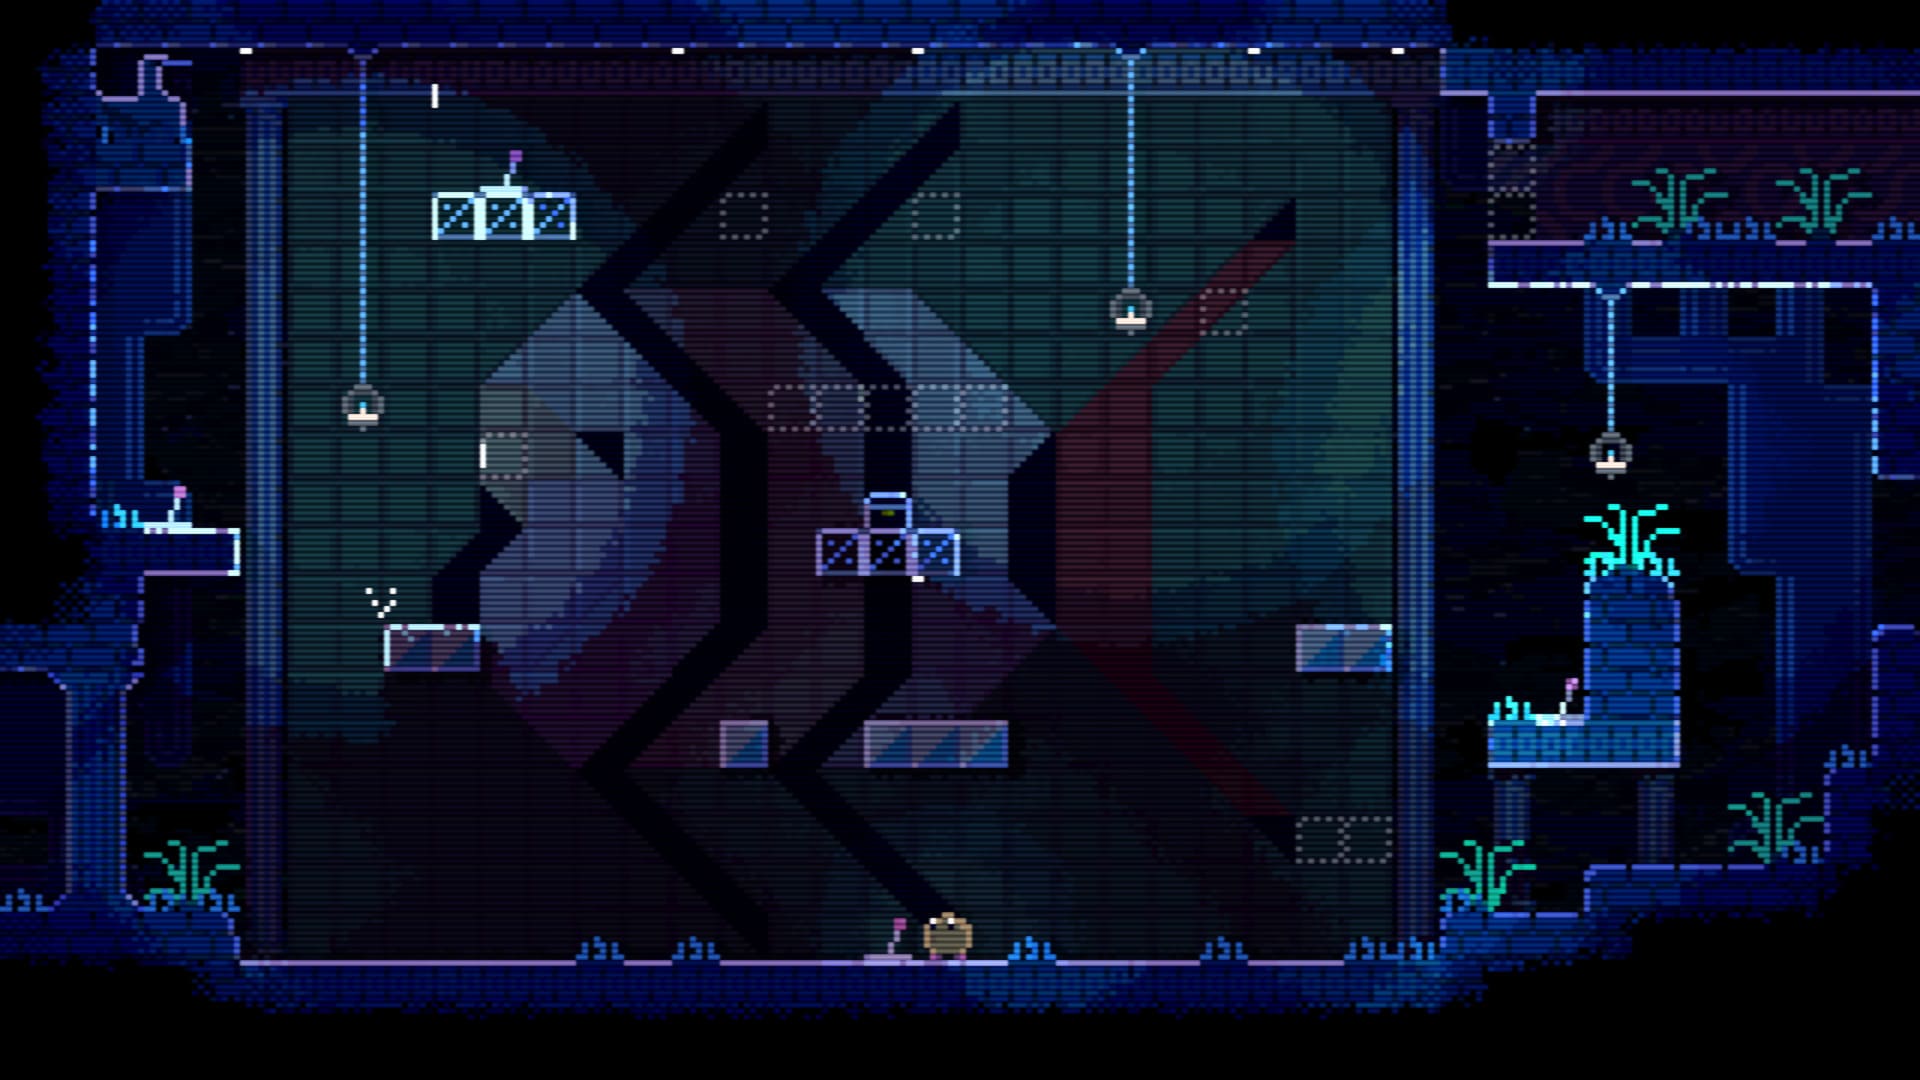 Gameplay from Animal Well showing off a large mural of a fish in the background.